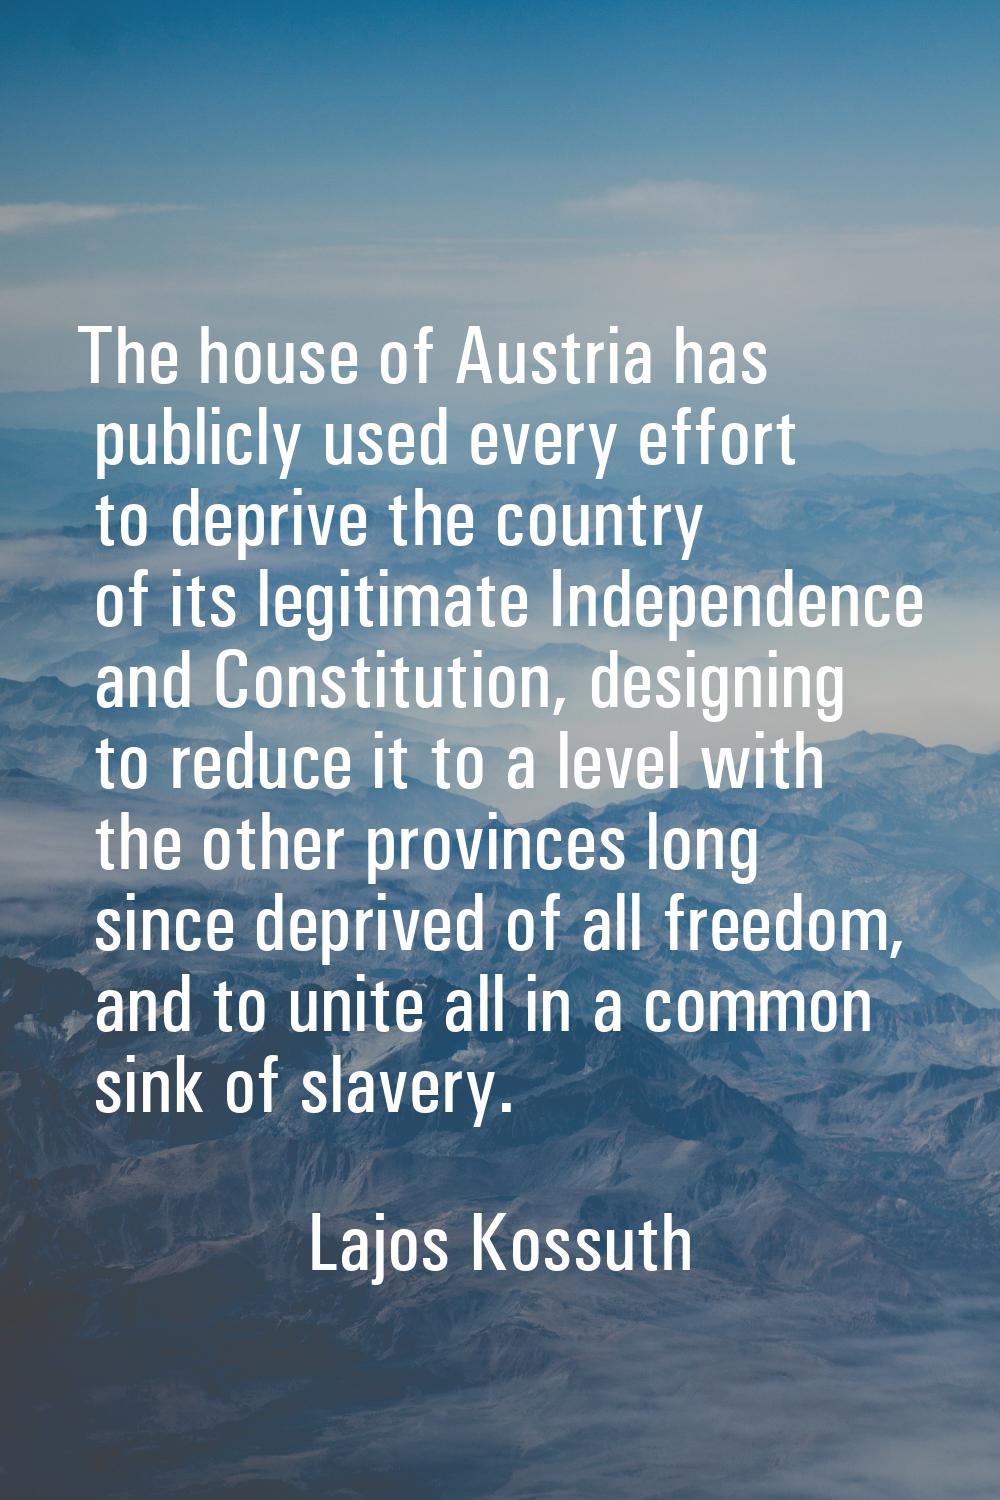 The house of Austria has publicly used every effort to deprive the country of its legitimate Indepe